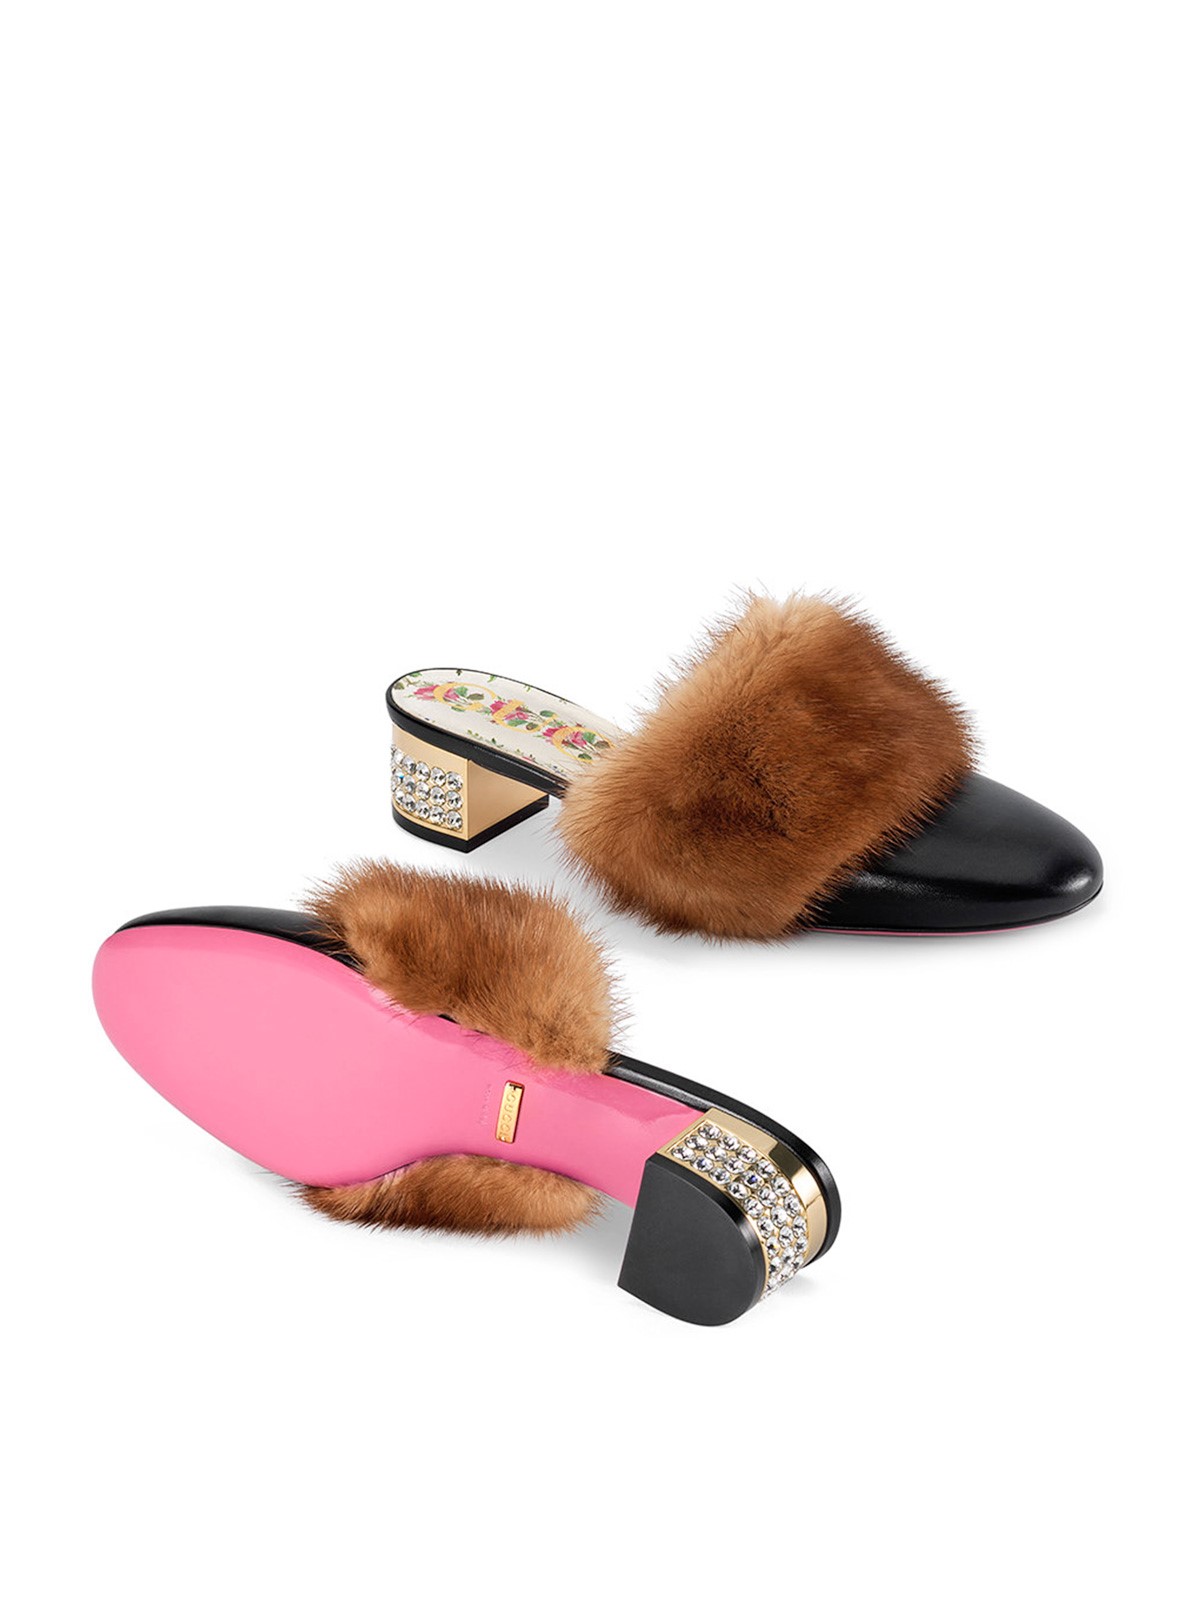 MINK FUR MULES WITH CRYSTALS by Gucci, available on montiboutique.com for $862 Vanessa Hudgens Shoes Exact Product 